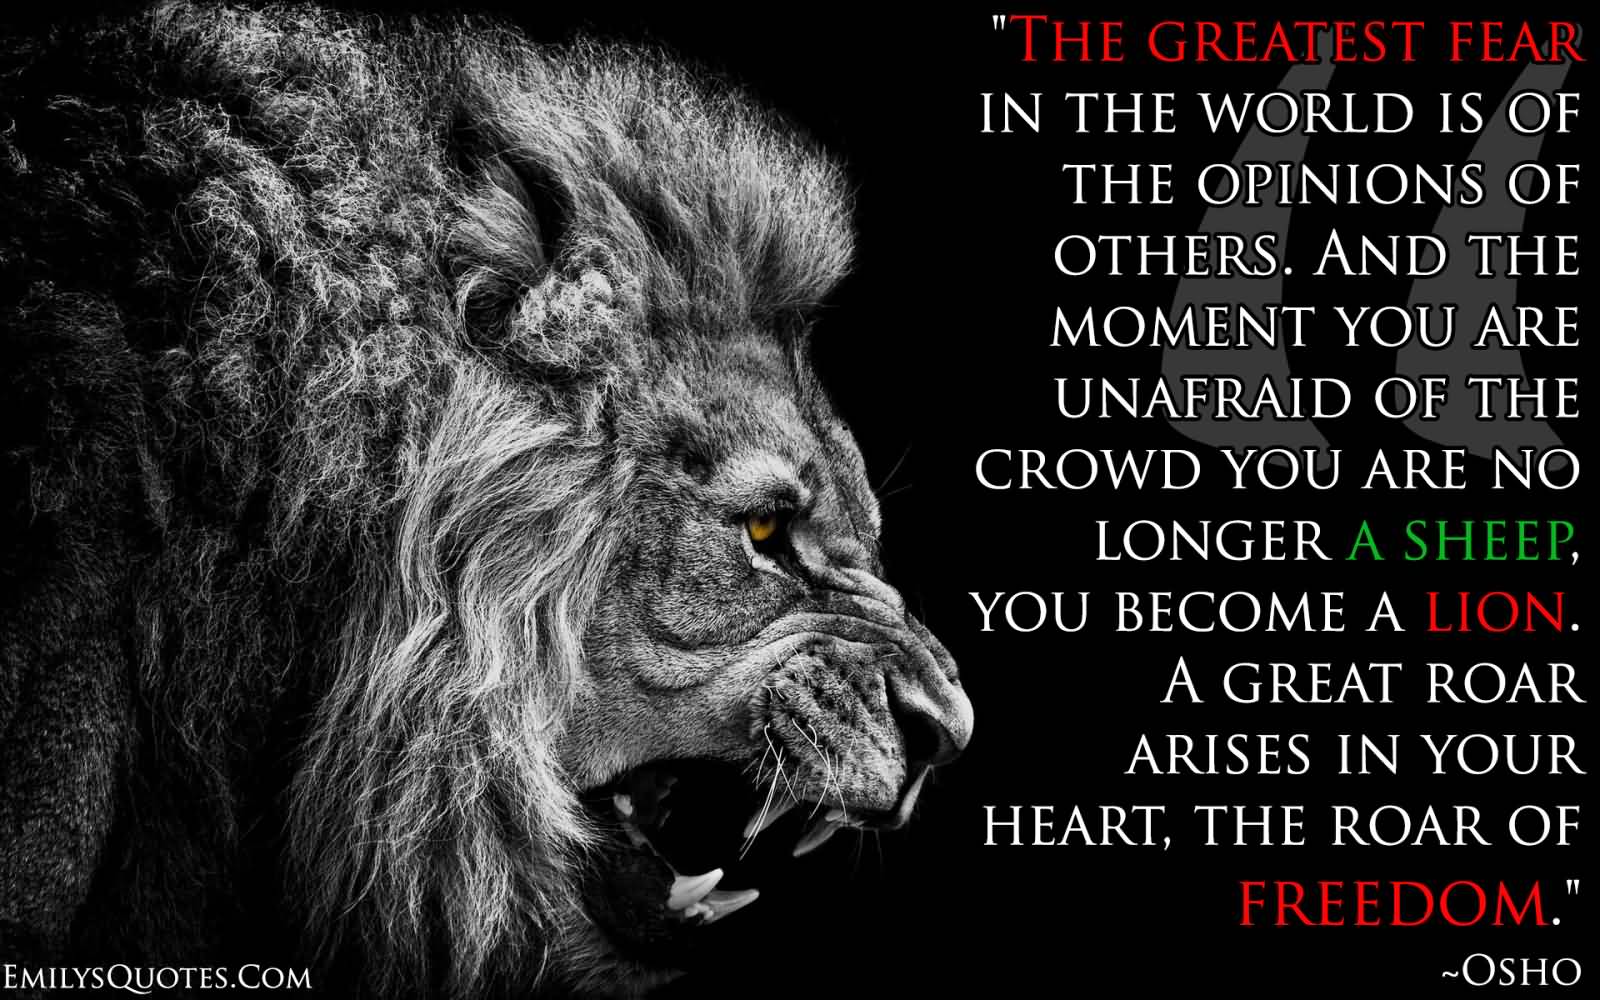 The greatest fear in the world is of the opinions of others. And the moment you are unafraid of the crowd you are no longer a sheep… Osho